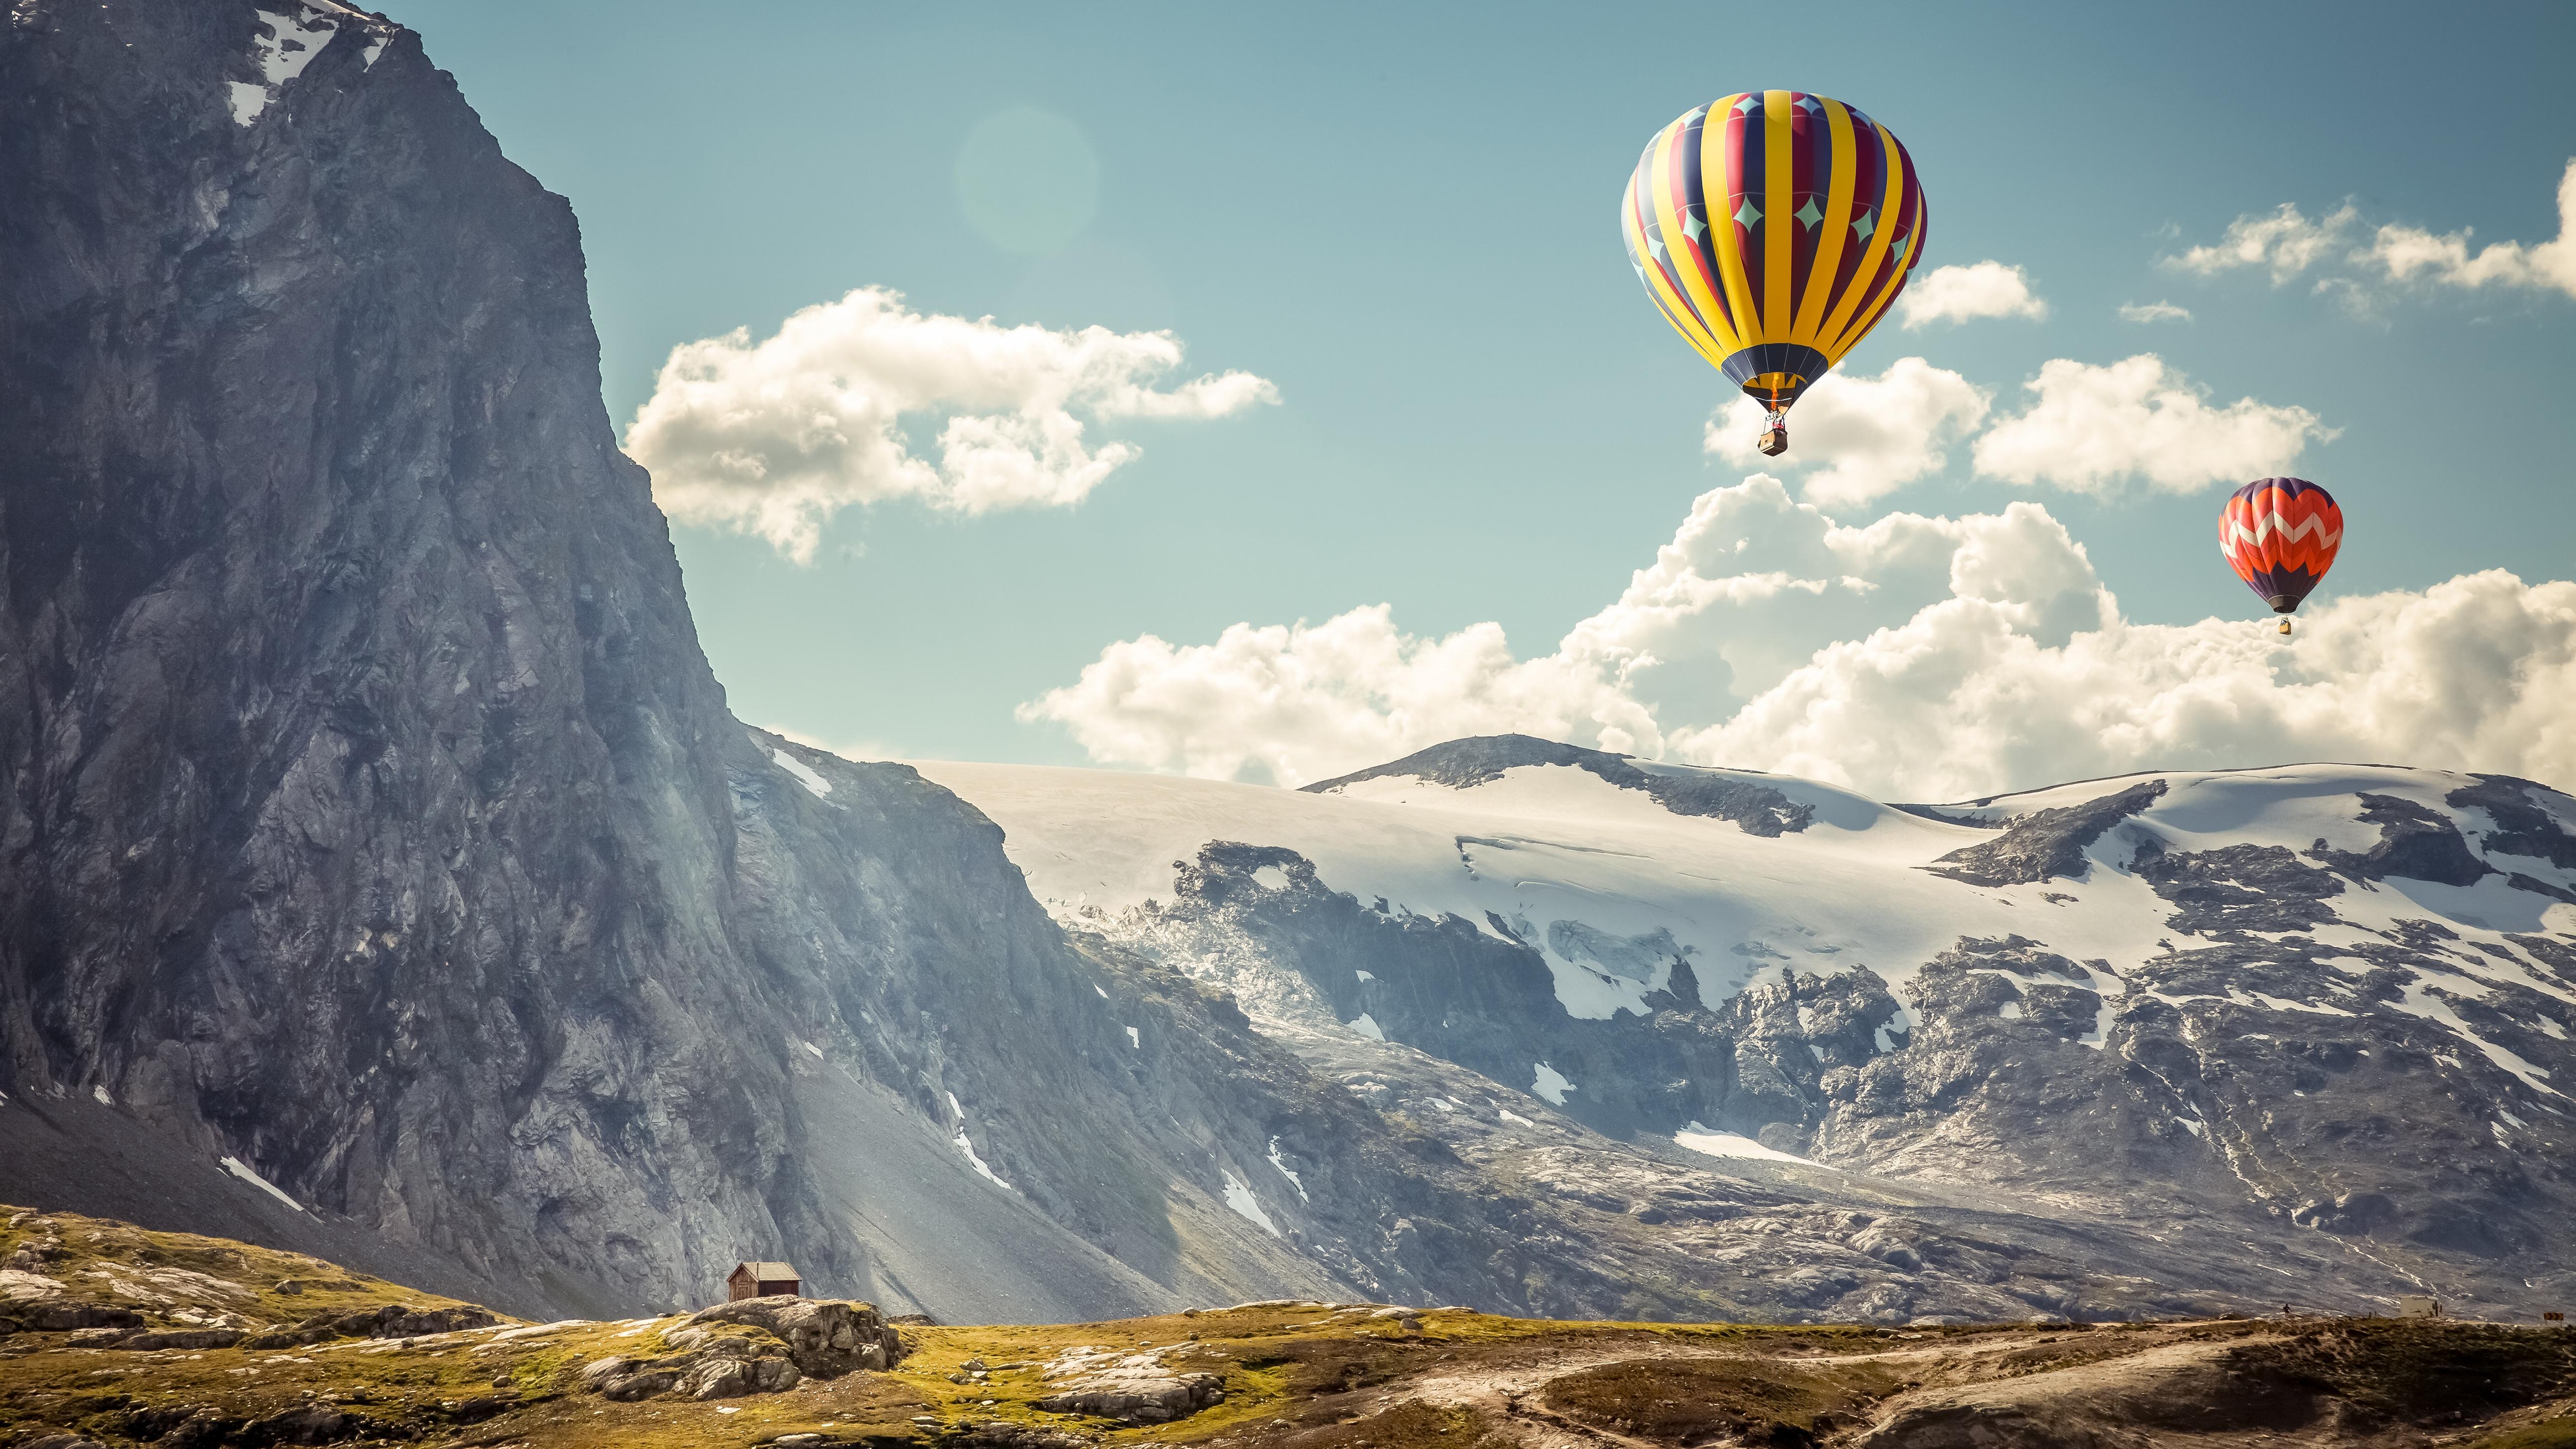 Download 5120x2880 Hot Air Balloon, Scenic, Mountain, Clouds, House